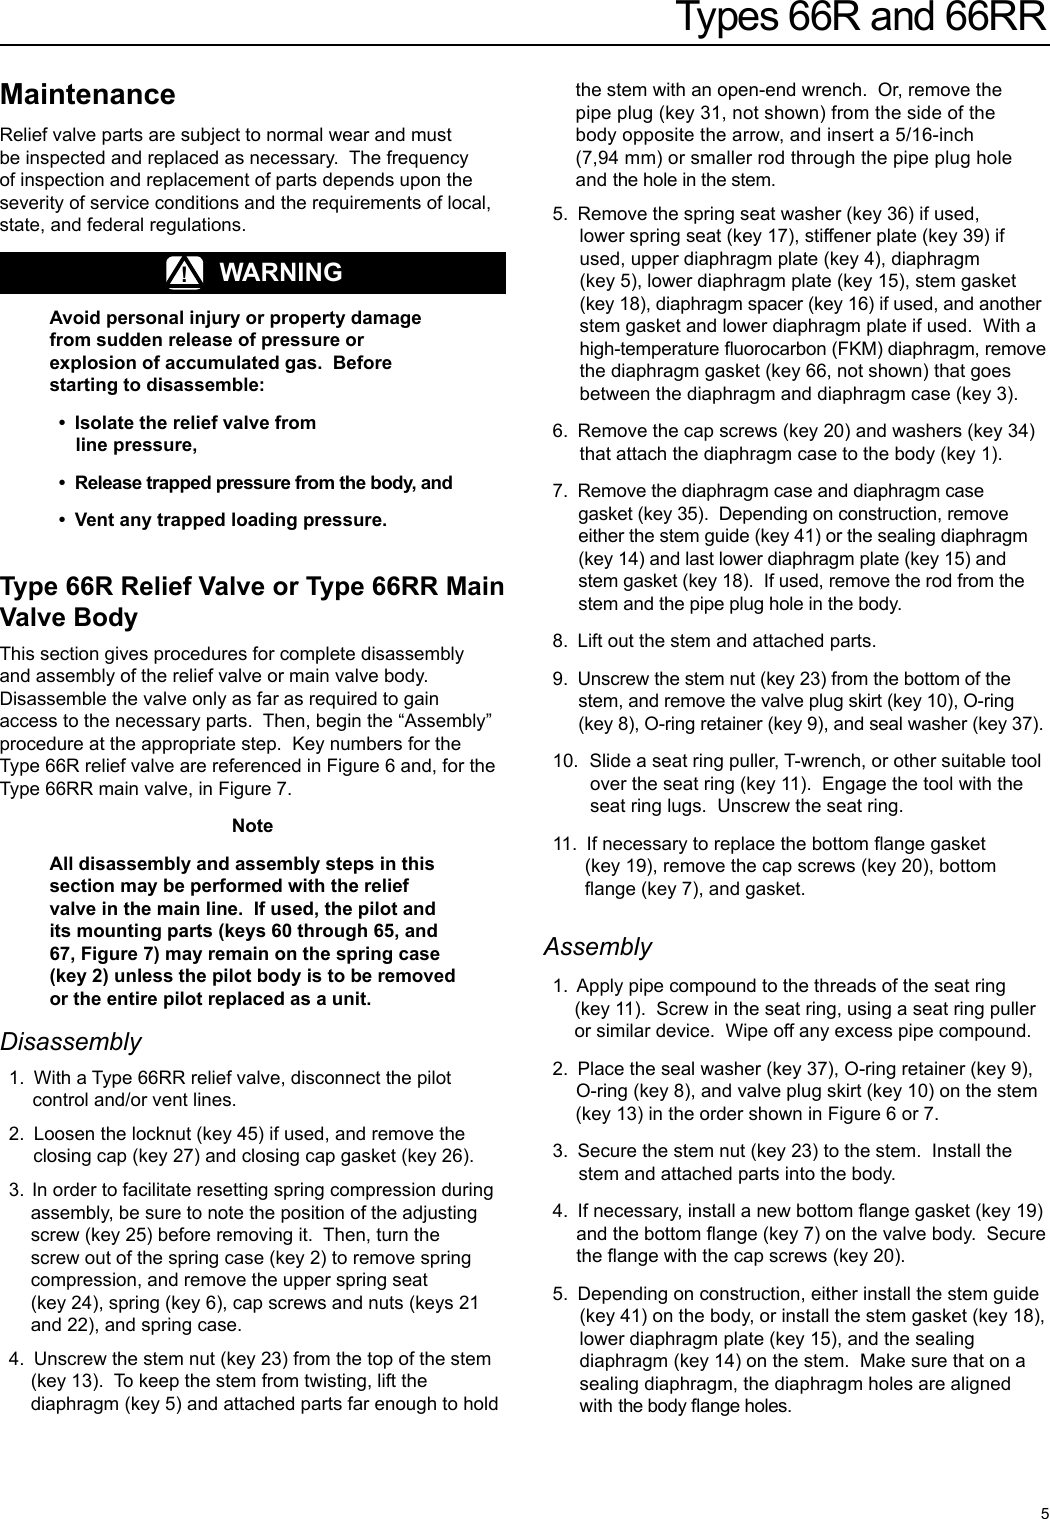 Page 5 of 12 - Emerson Emerson-66R-Series-Vapor-Recovery-Valves-Instruction-Manual-  Emerson-66r-series-vapor-recovery-valves-instruction-manual